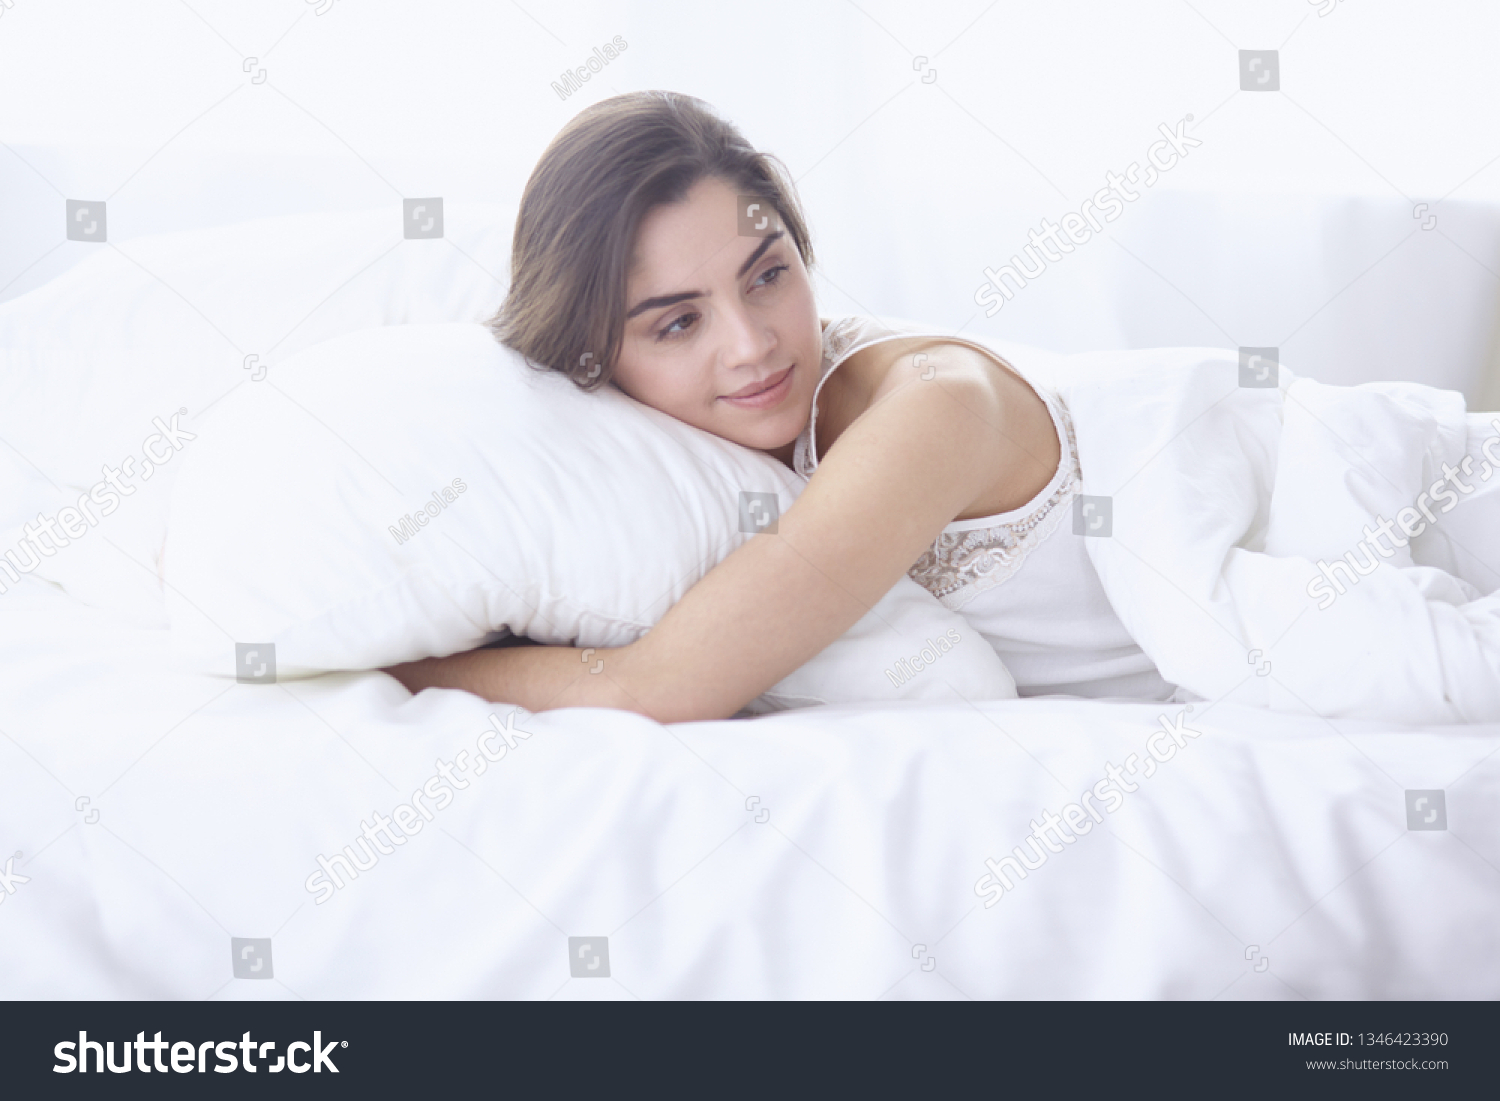 beautiful young woman basking in bed in the morning. Beautiful  #1346423390